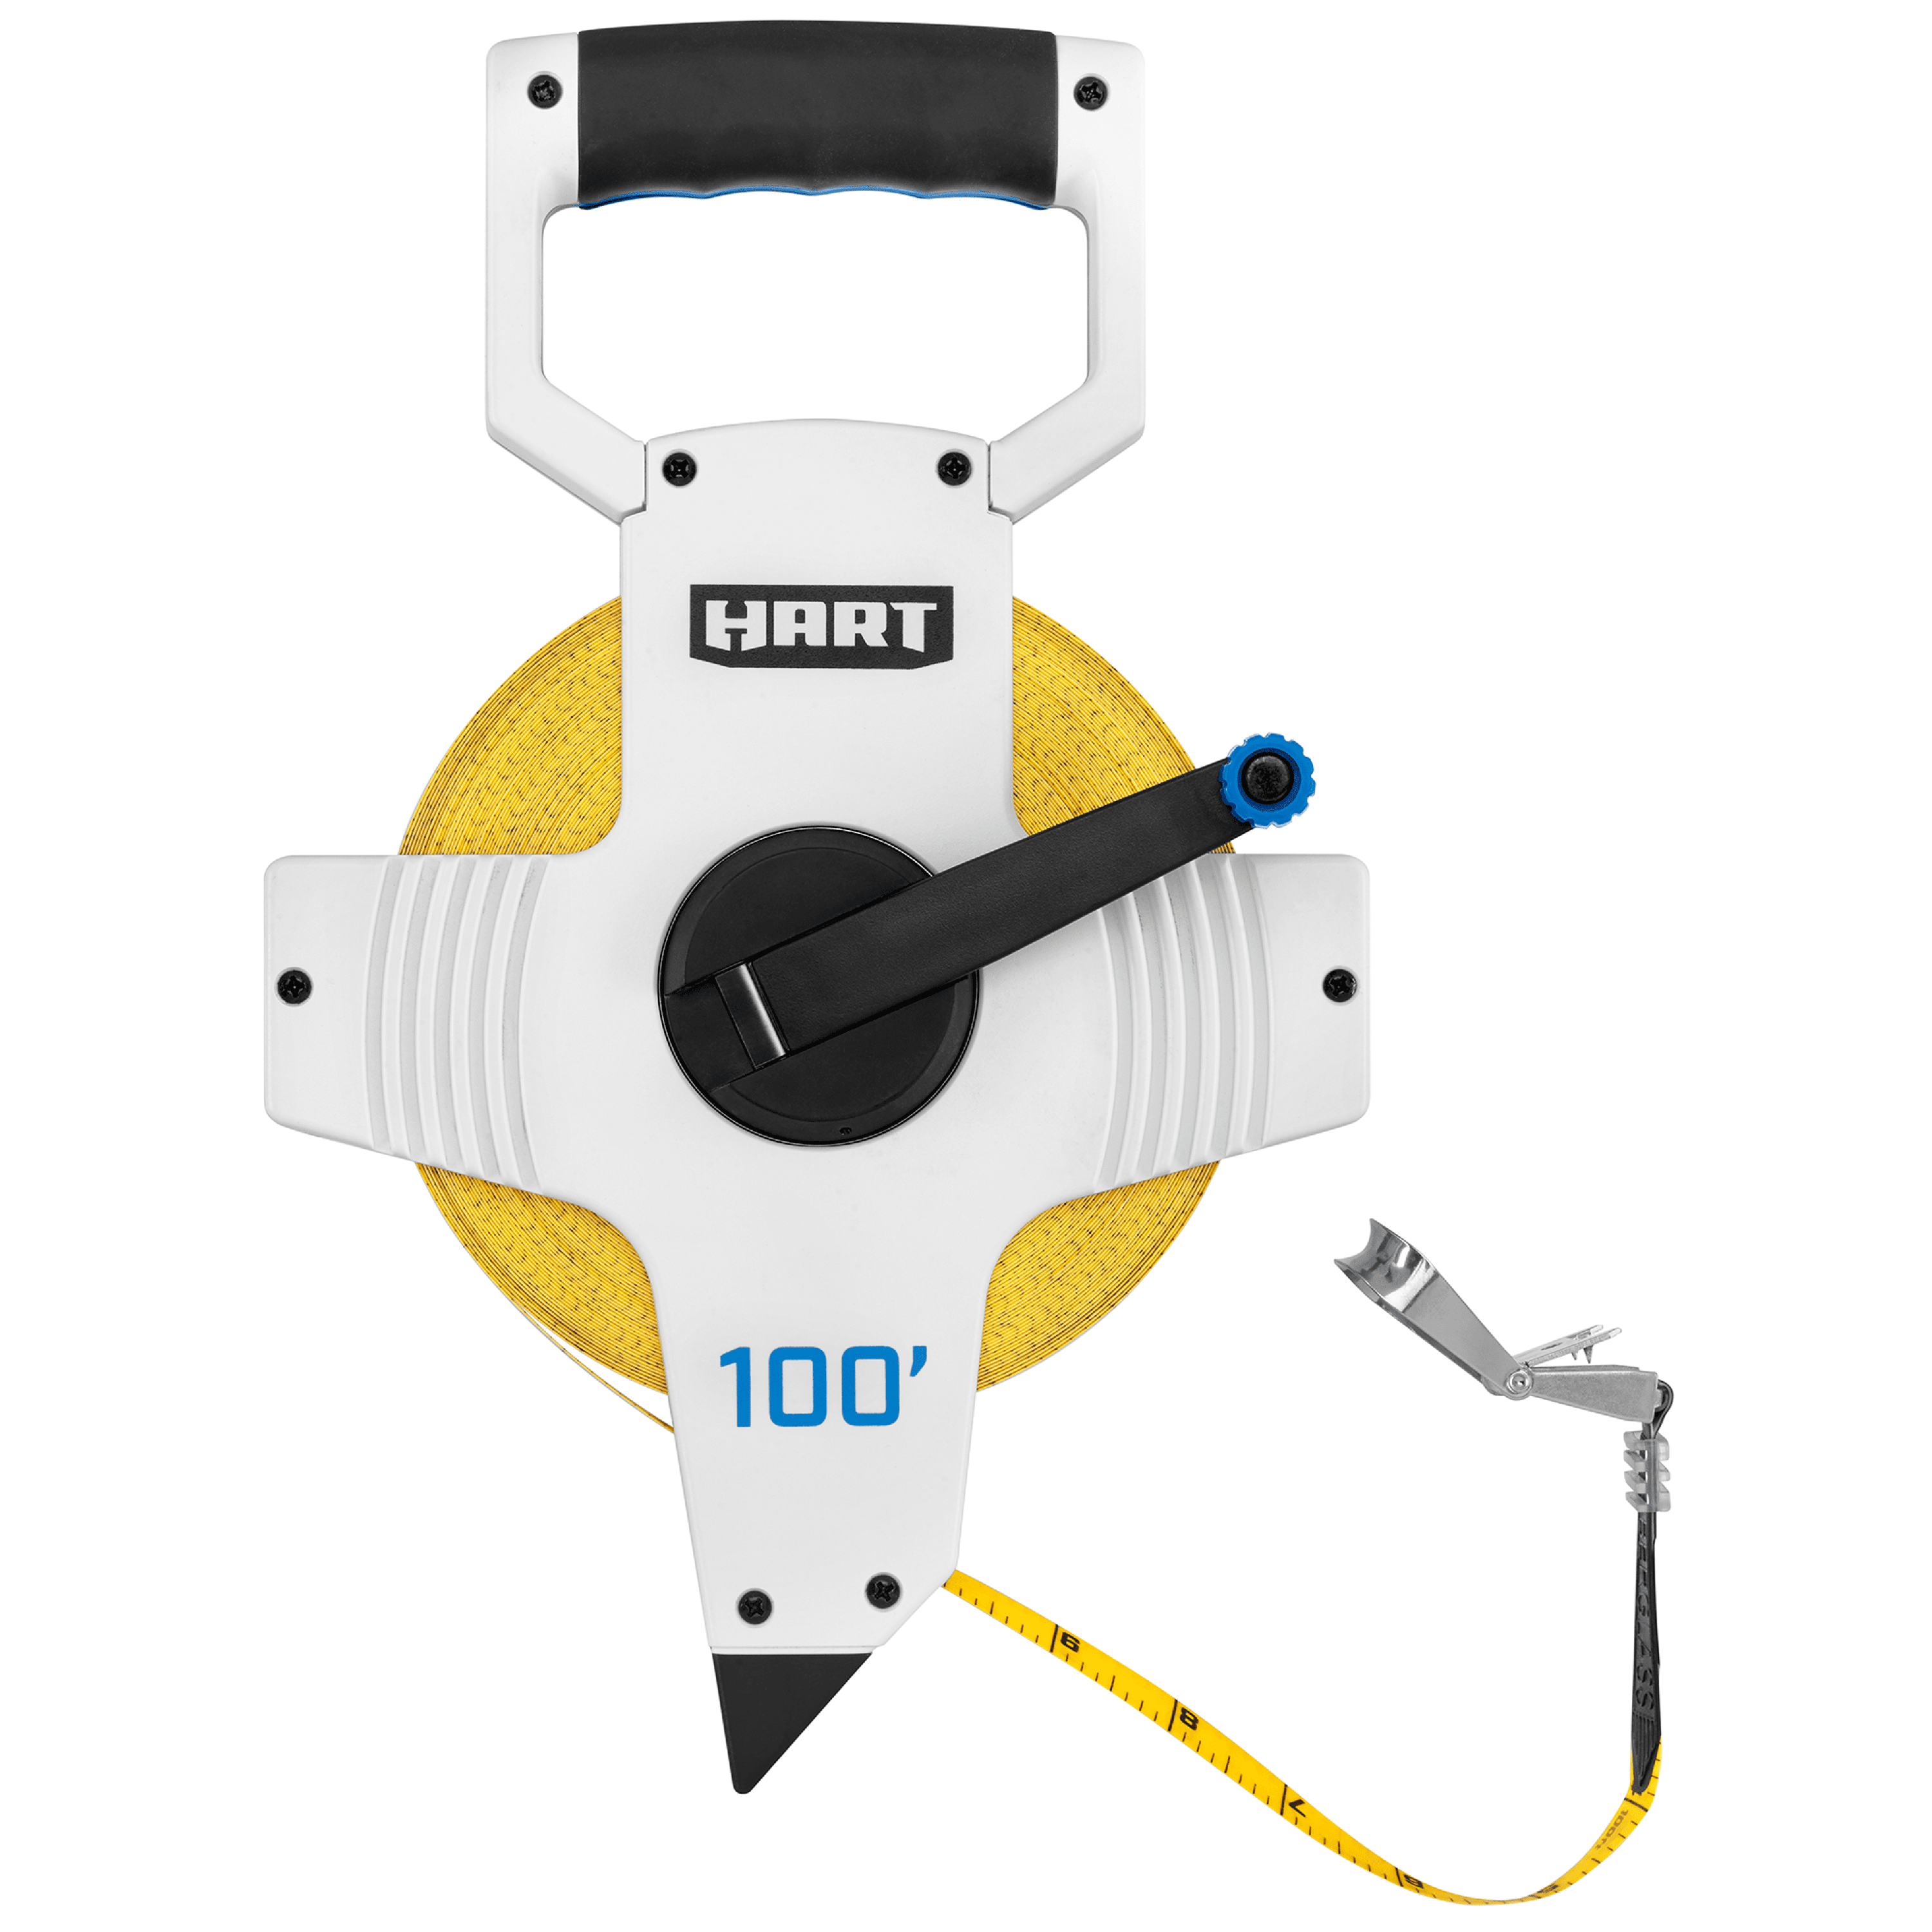 Hart Magnetic Tape Measures - Pro Tool Reviews